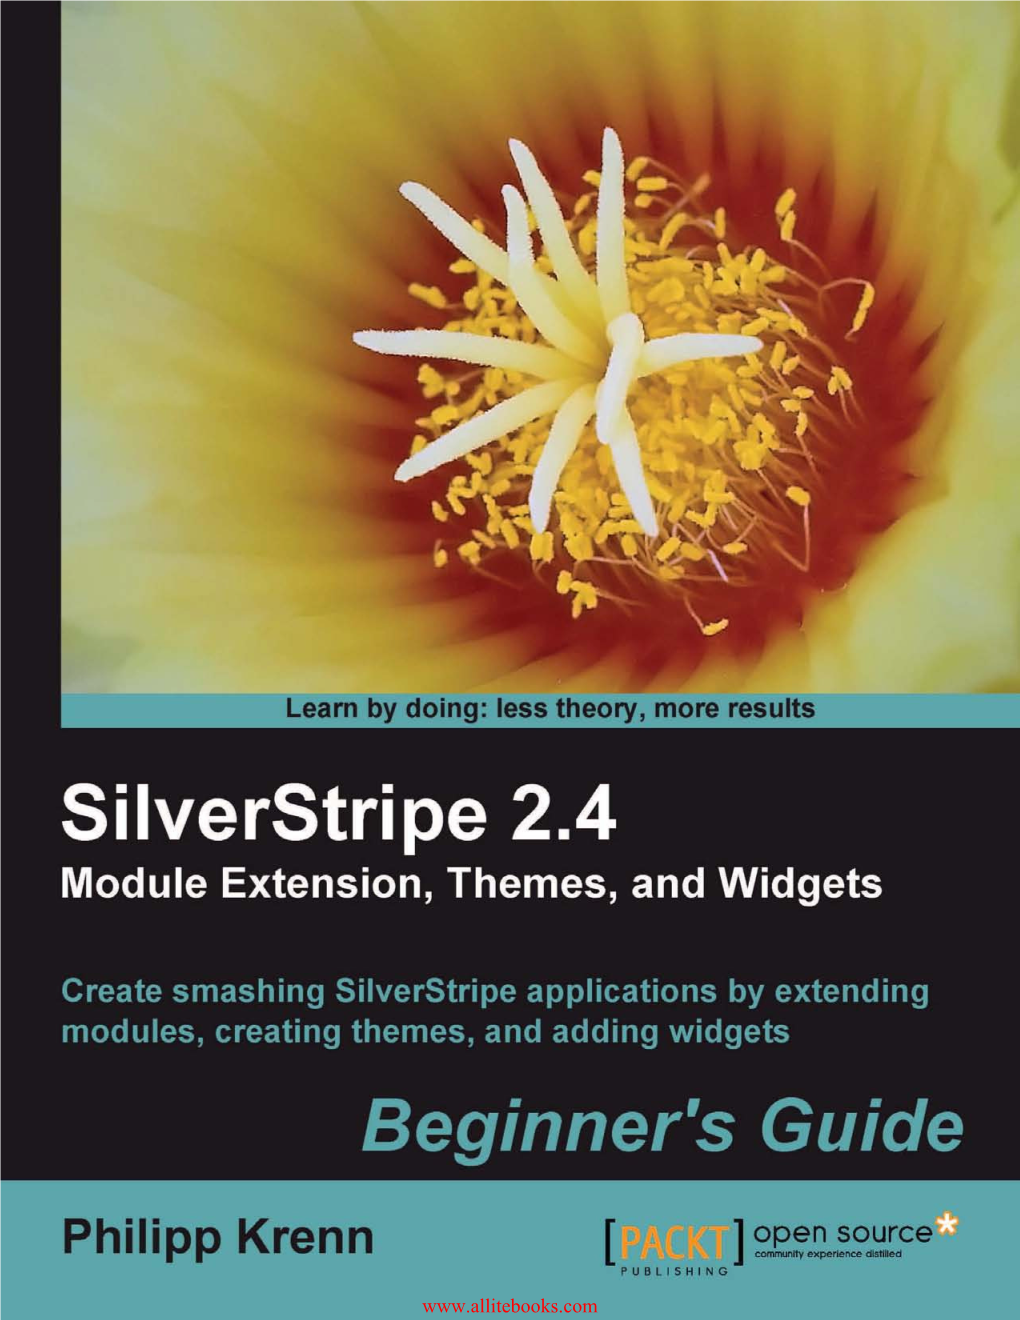 Silverstripe 2.4 Module Extension, Themes, and Widgets Beginner's Guide